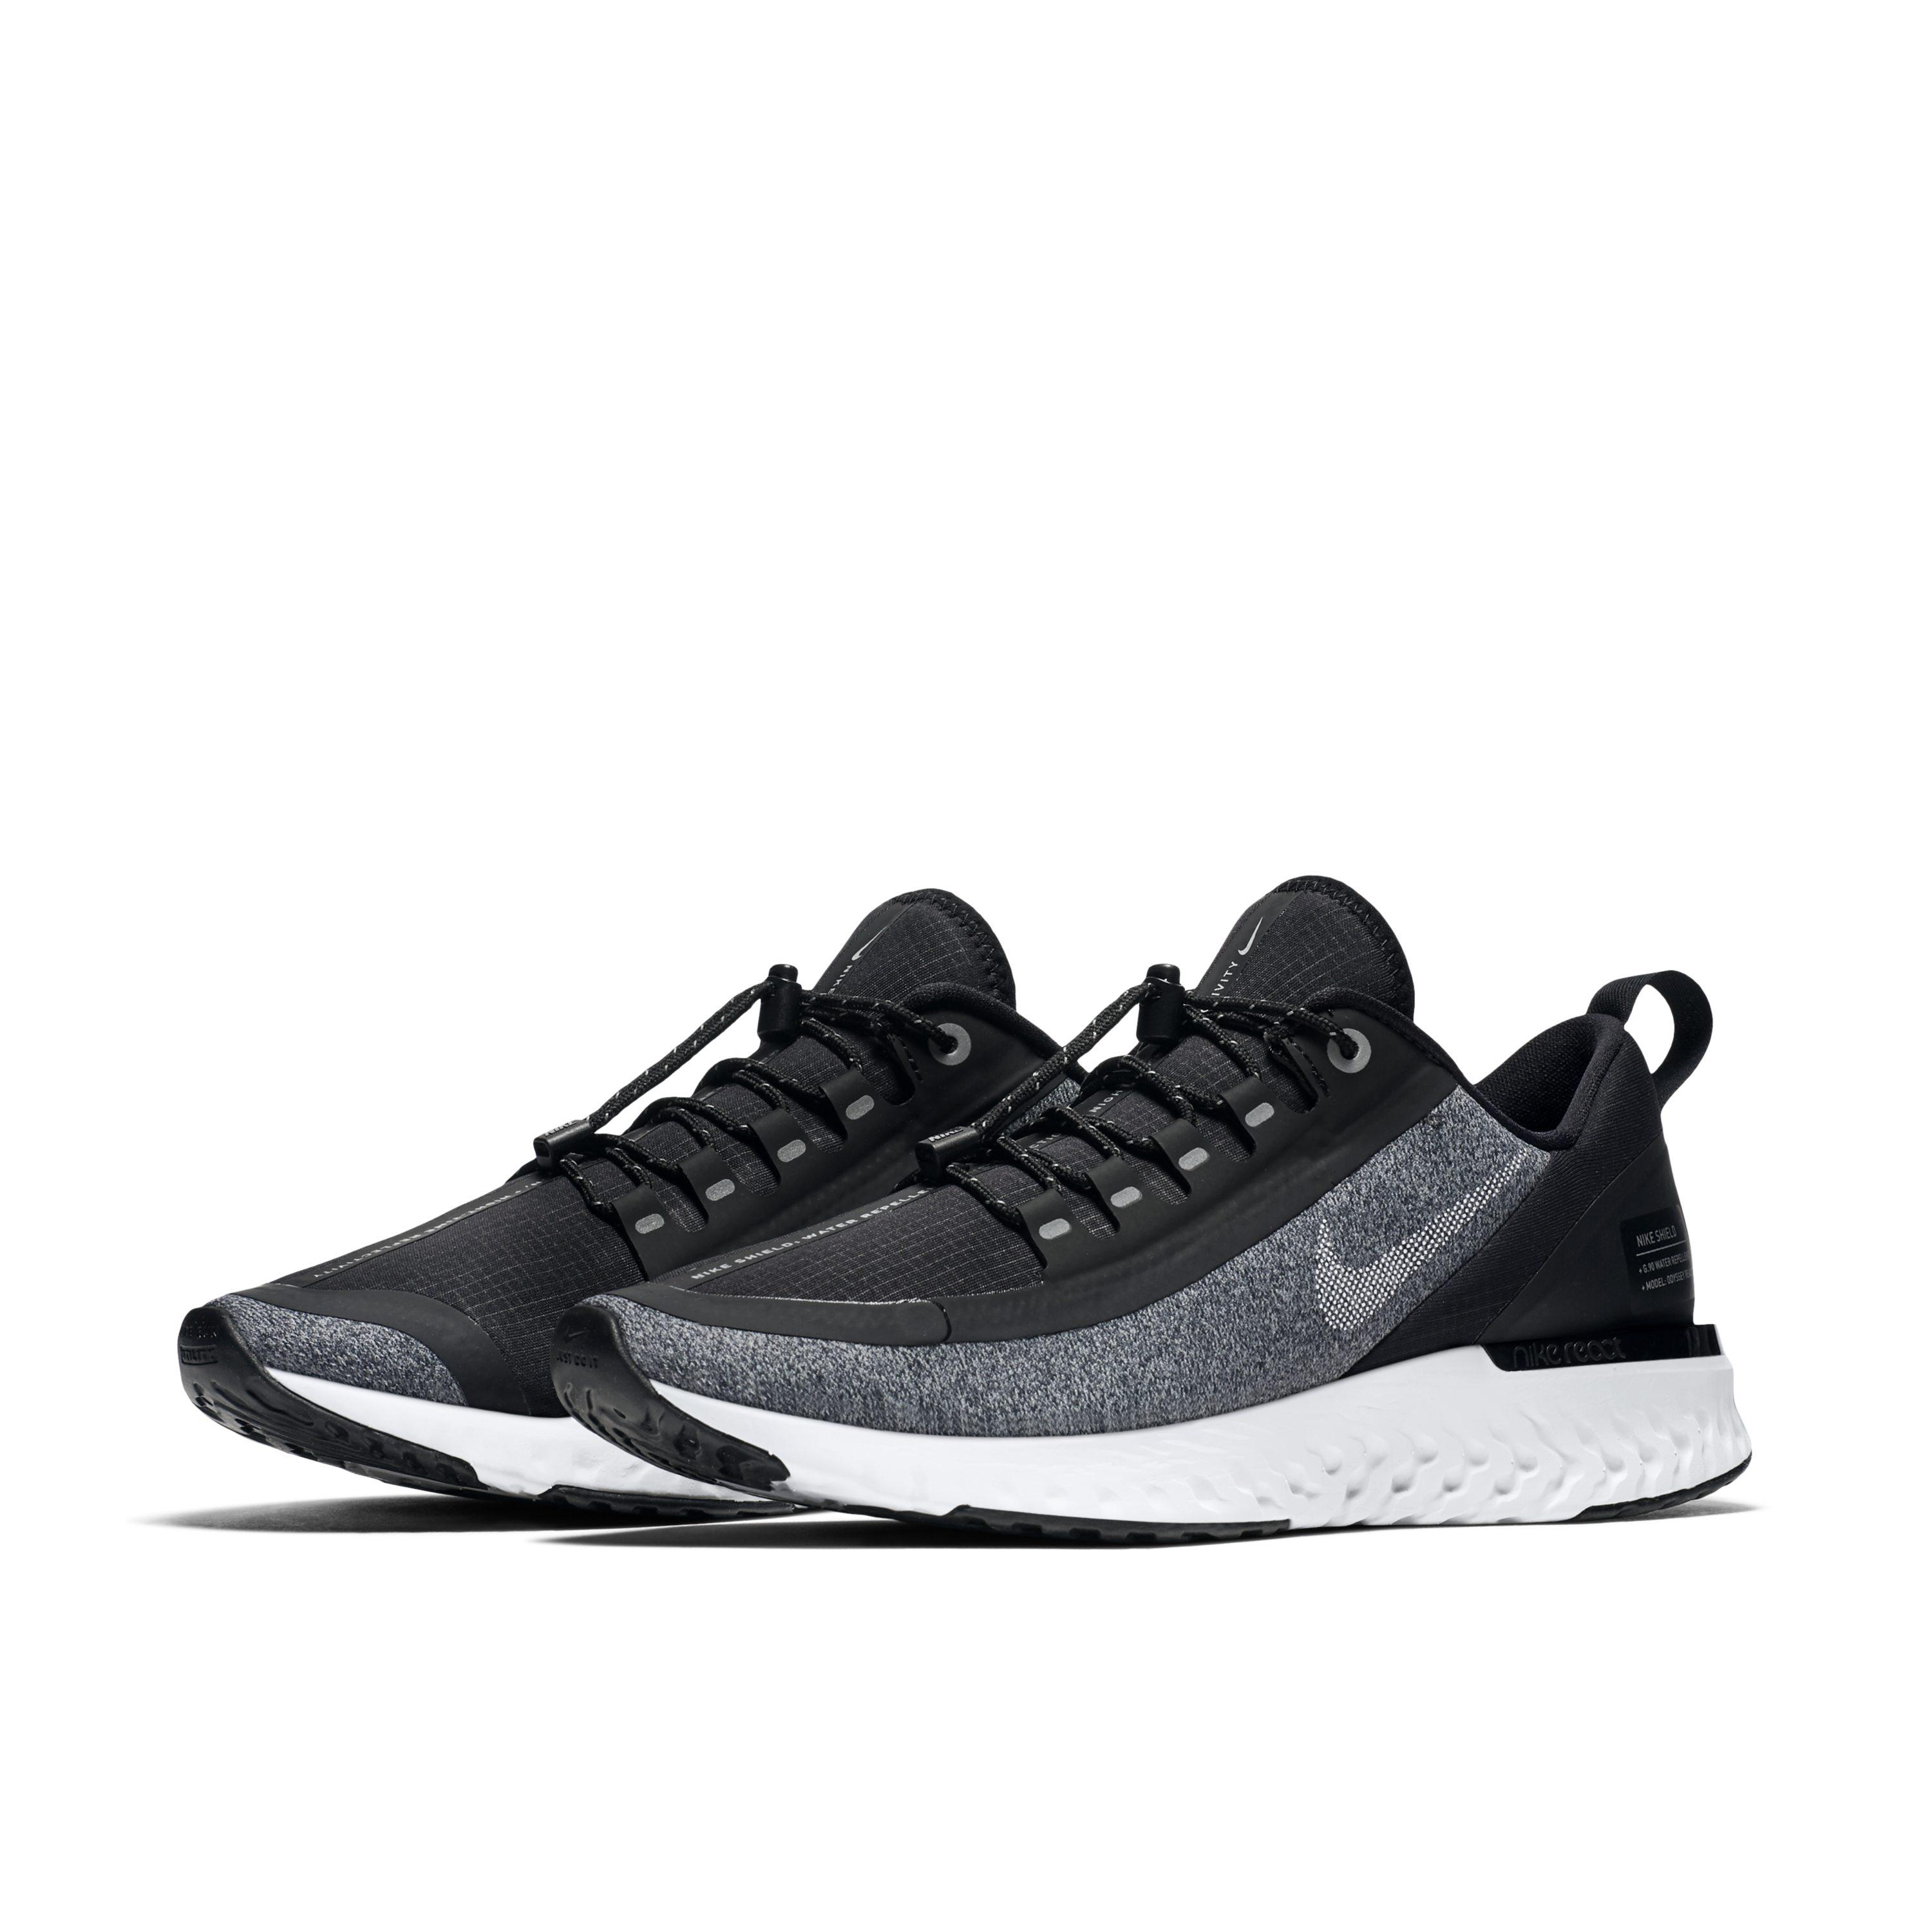 Nike Odyssey React Shield Water-repellent Running Shoe in Black - Lyst